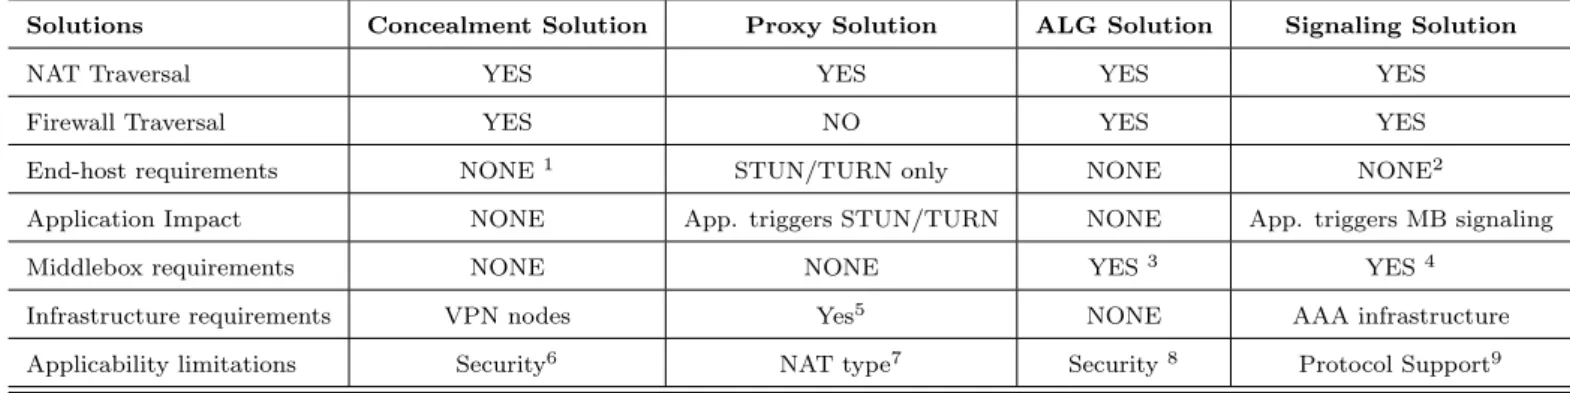 Table 2.1: Solutions Summary